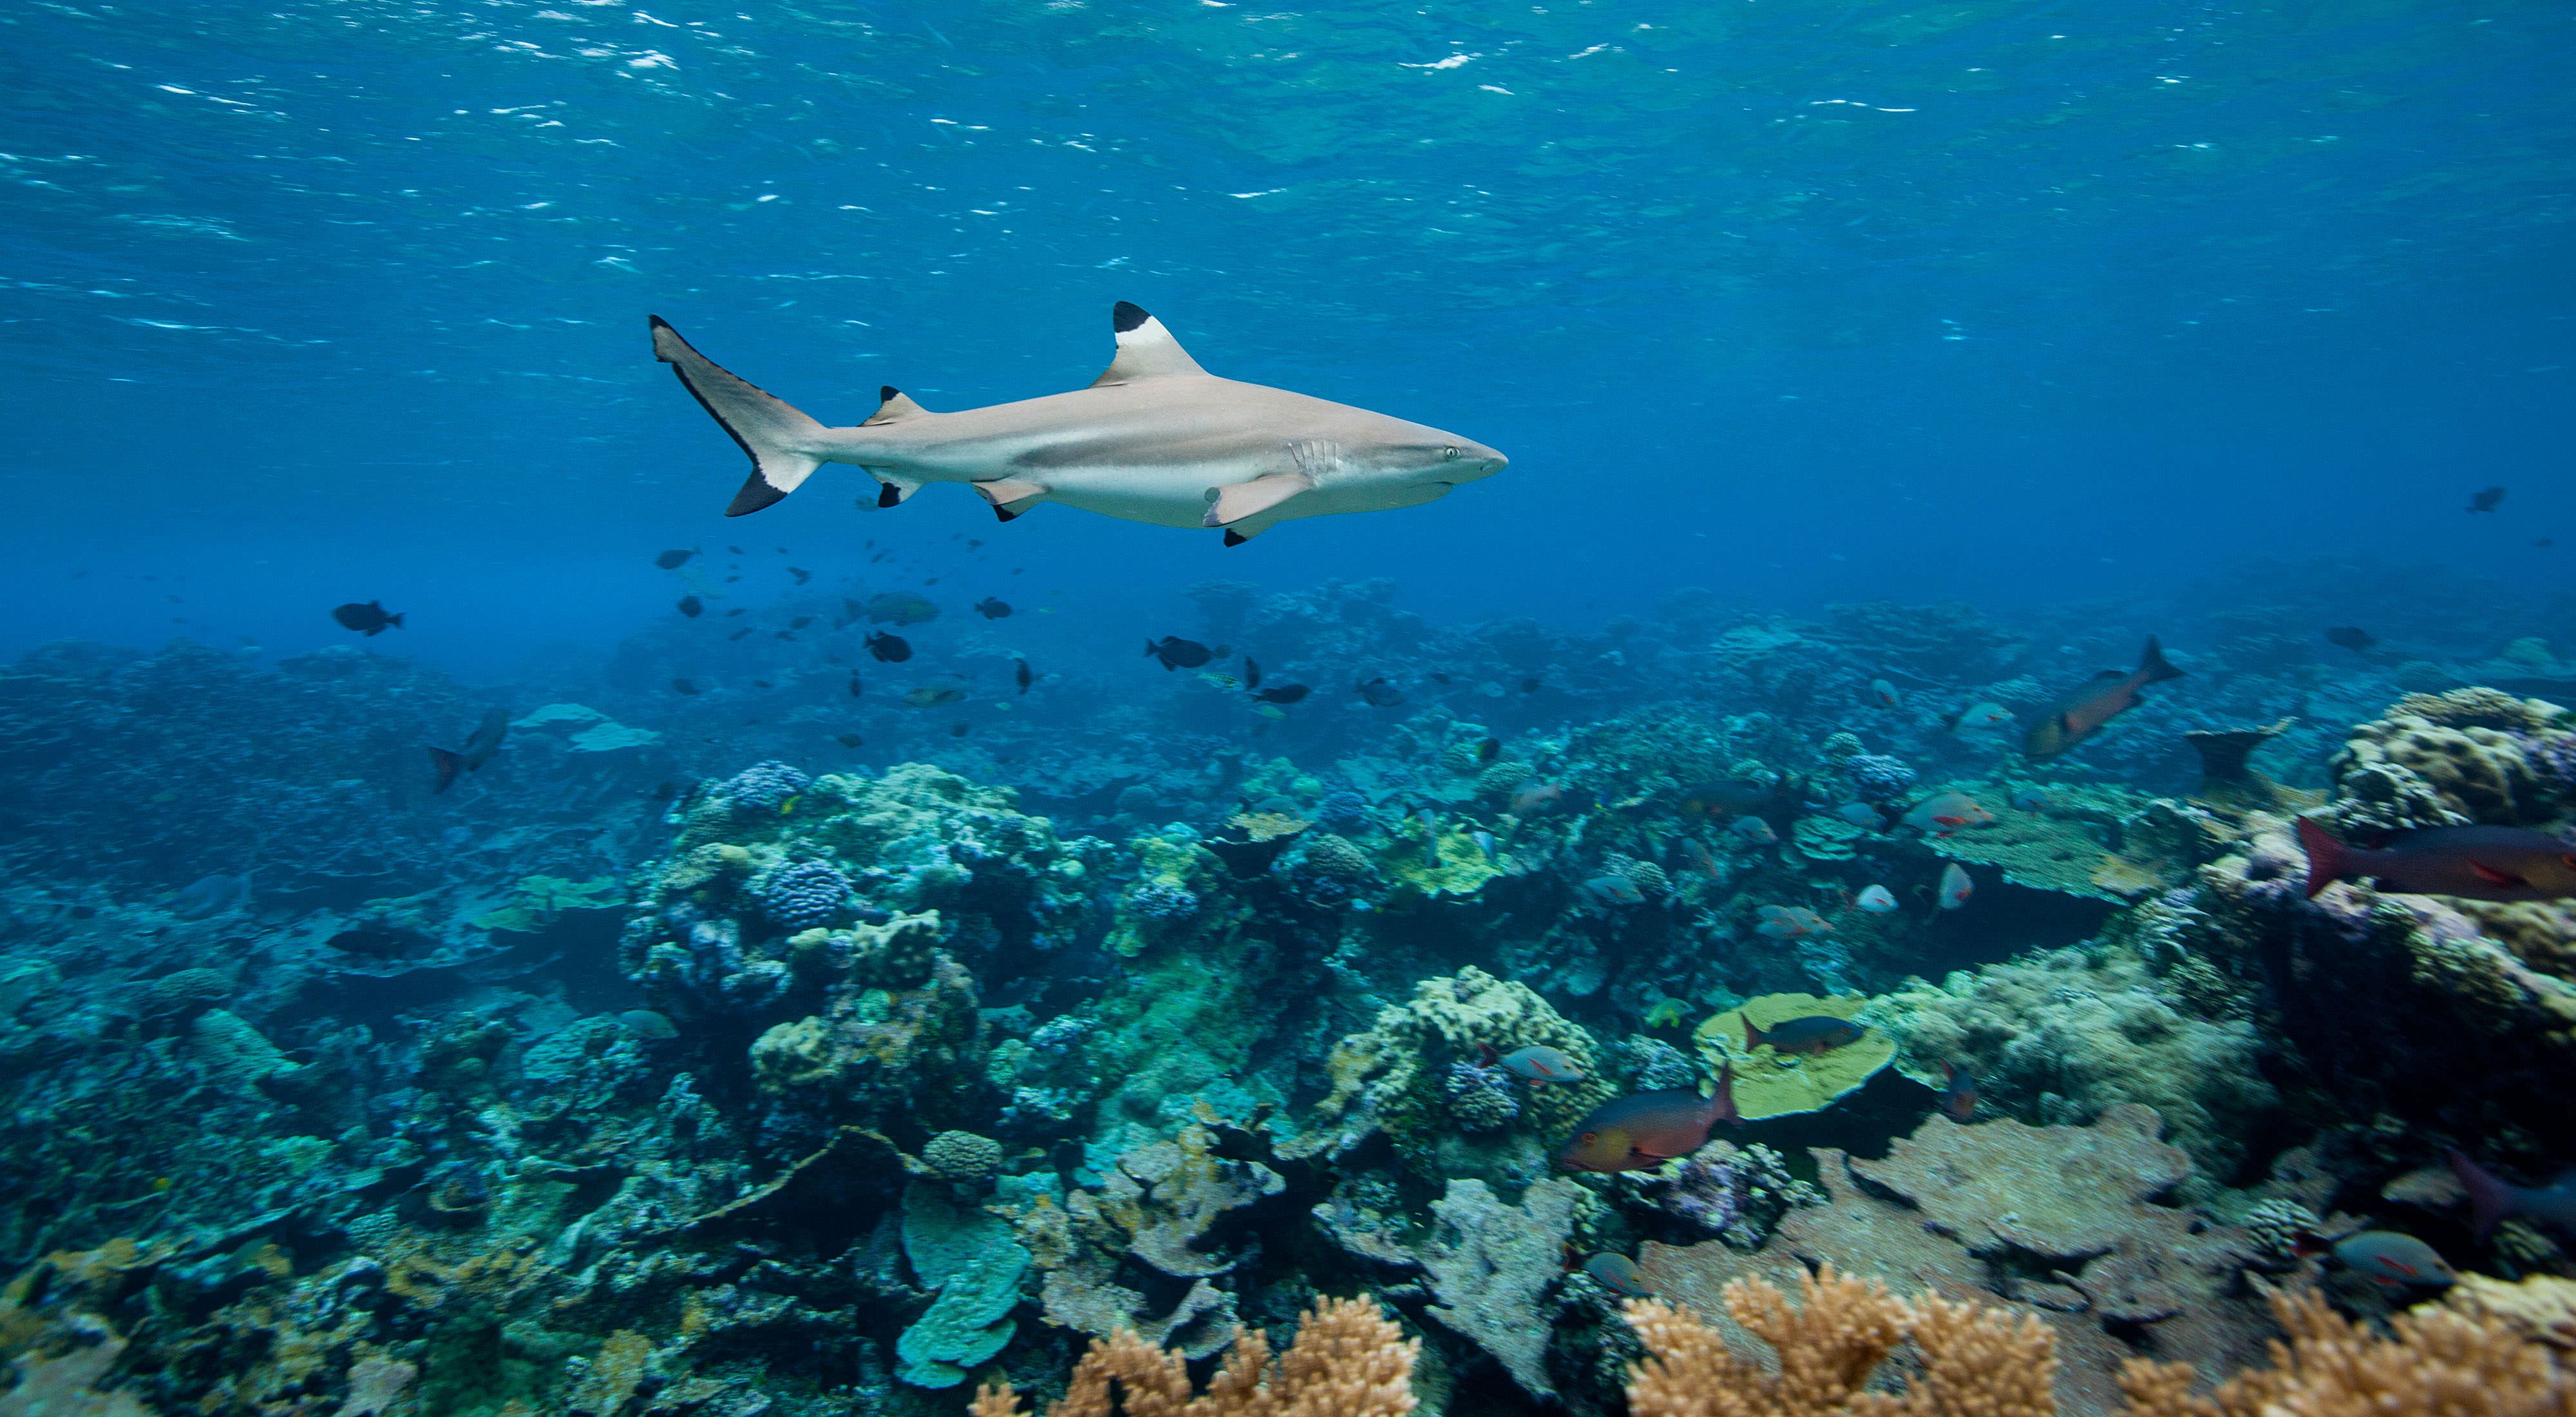 An adult blacktip shark cruises over Penguin Spit Reef, located near the atoll’s western channel. Blacktips typically grow up to 5 feet long.